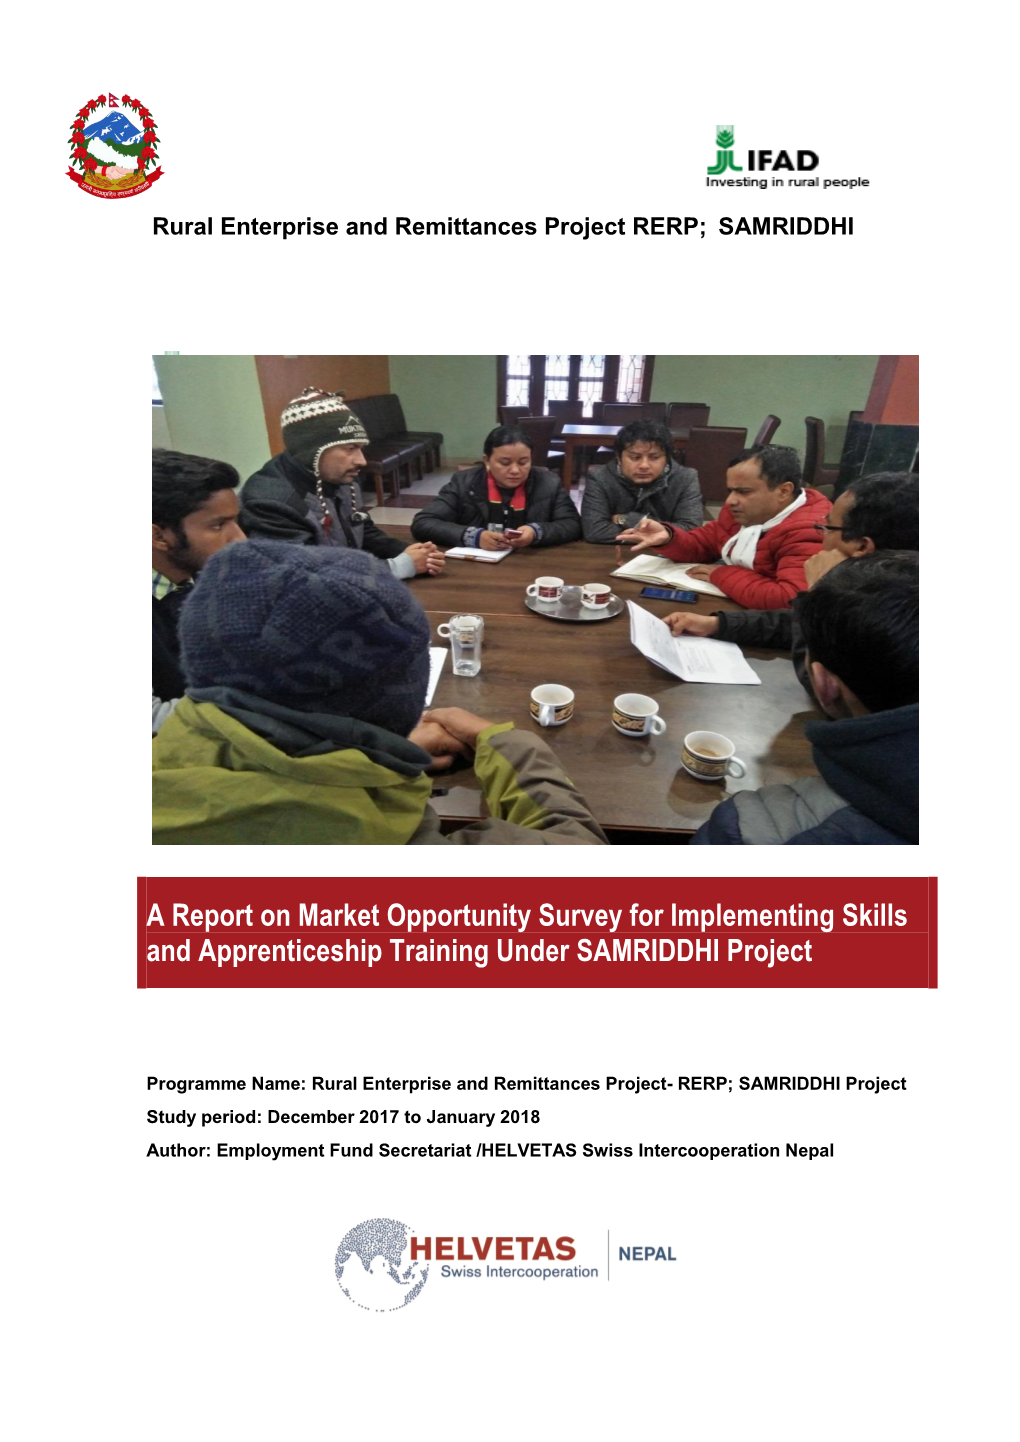 A Report on Market Opportunity Survey for Implementing Skills and Apprenticeship Training Under SAMRIDDHI Project